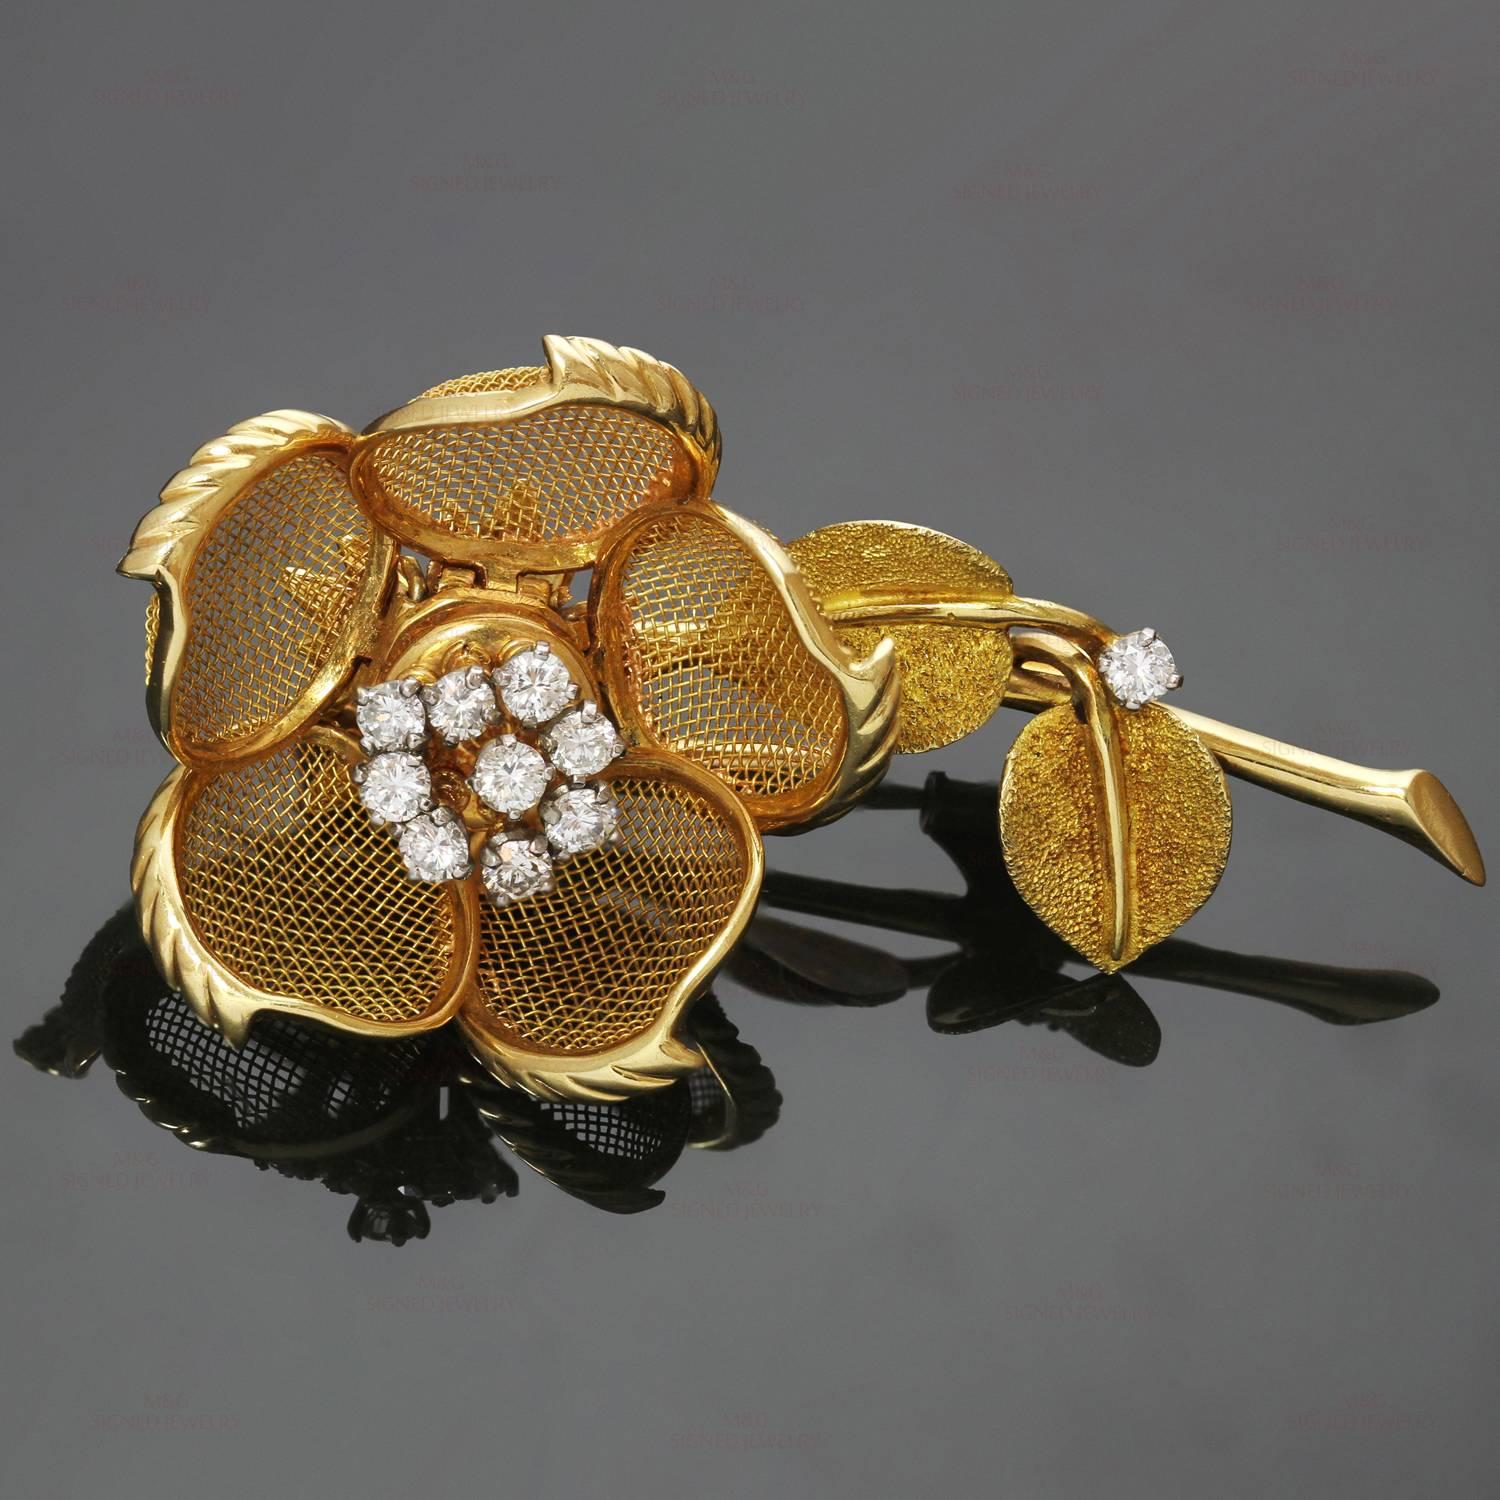 This stunning Cartier brooch features a rose flower design crafted in 18k yellow gold and set with brilliant-cut round diamonds of an estimated 0.70 - 0.80 carats. The petals on this brooch are movable. Made in France circa 1940s. Measurements: